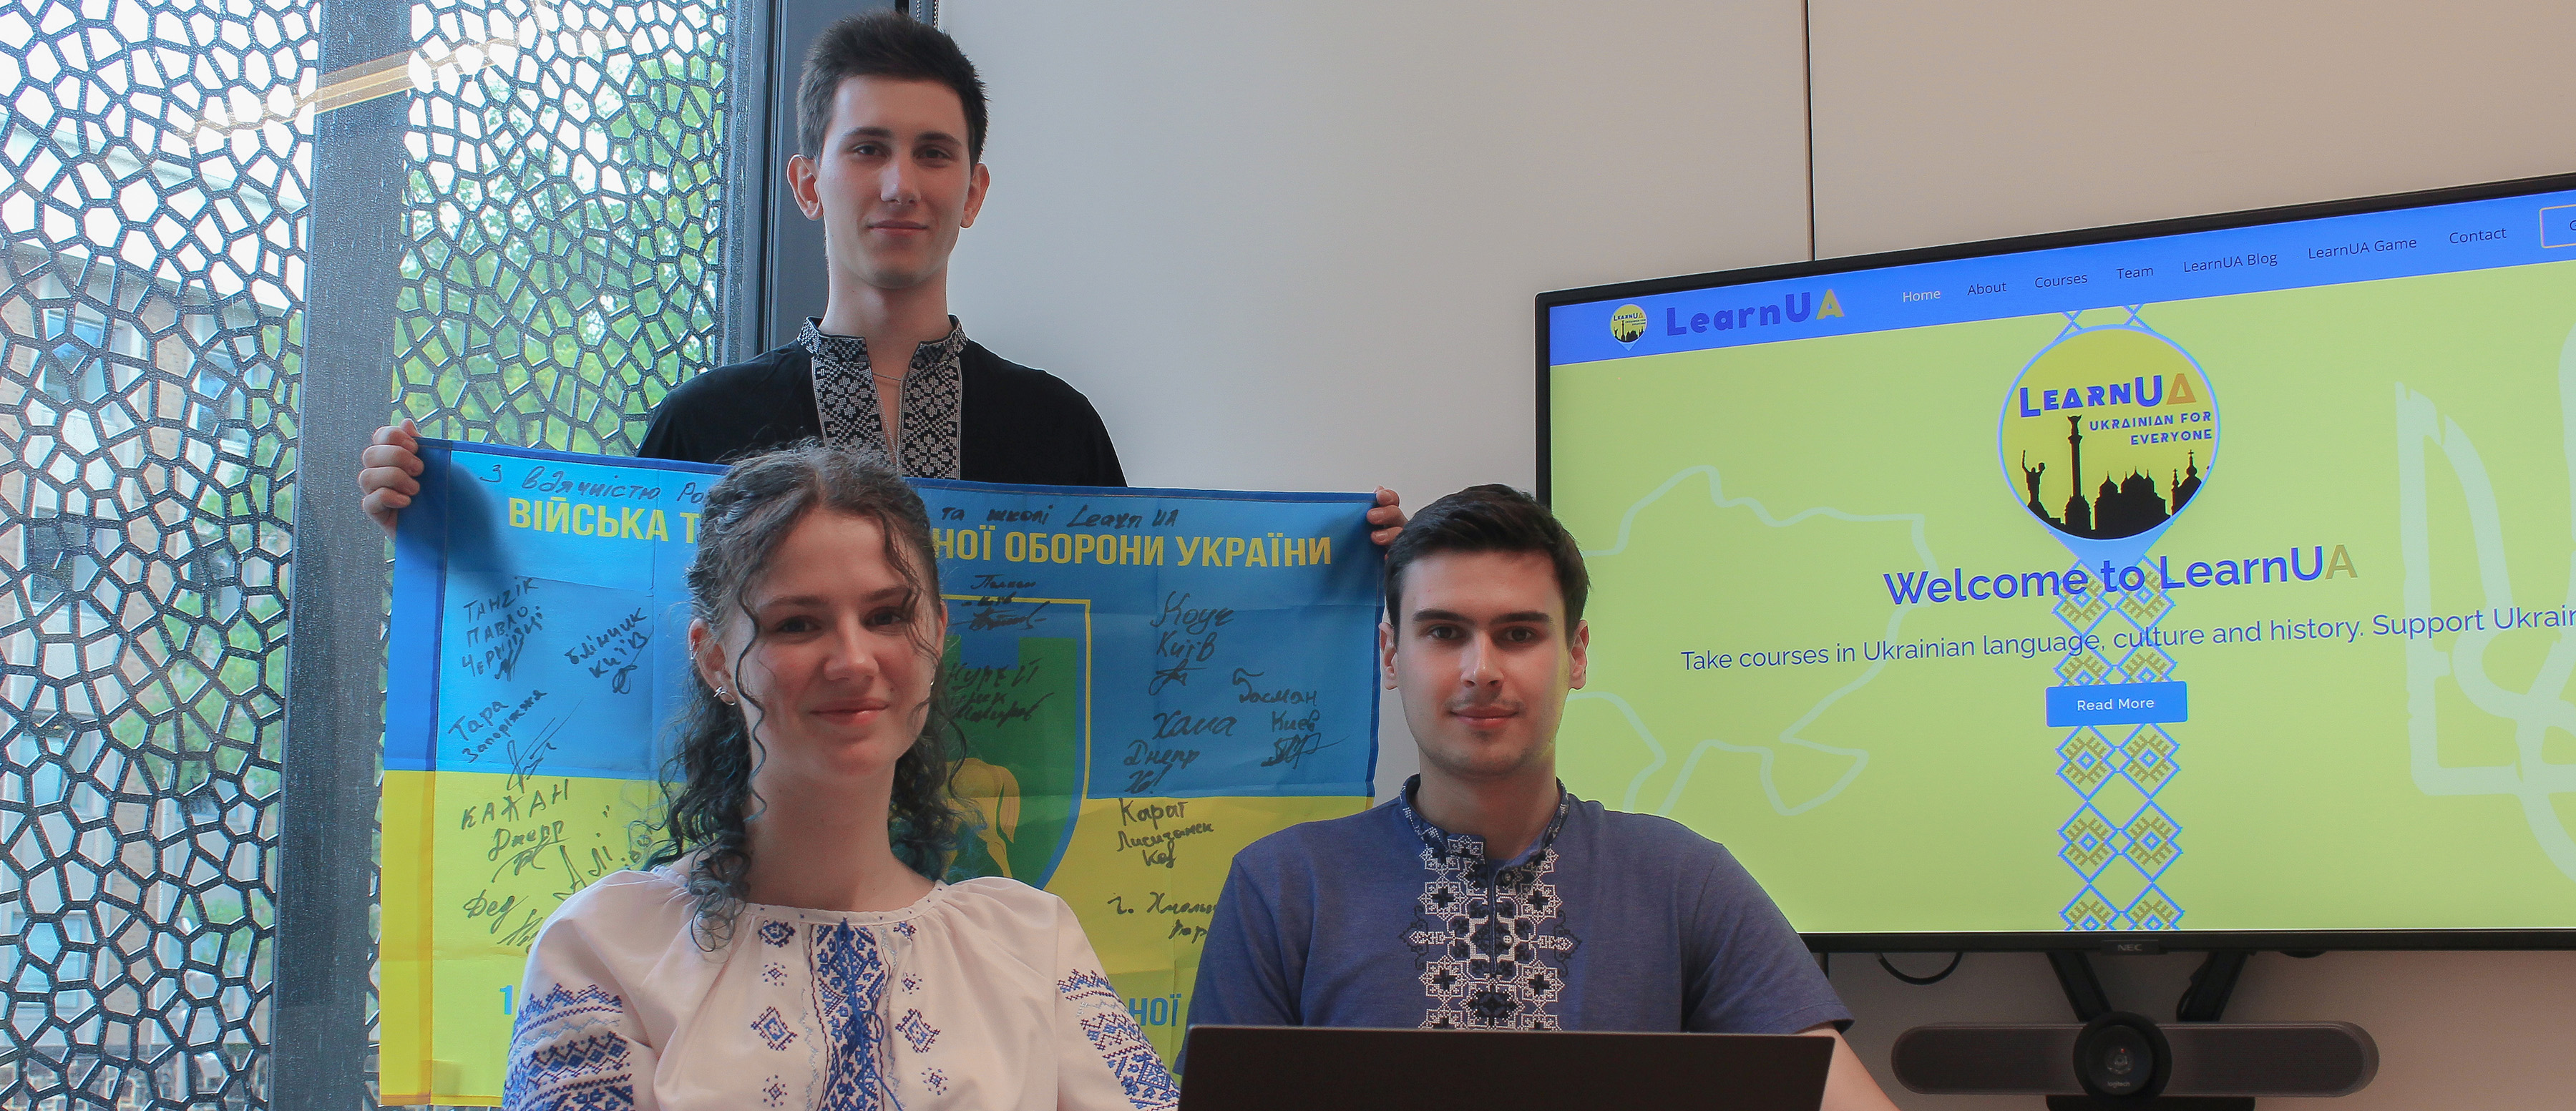 A man and woman sit in front of another man holding a Ukrainian flag while a large screen displays “welcome to LearnUA”